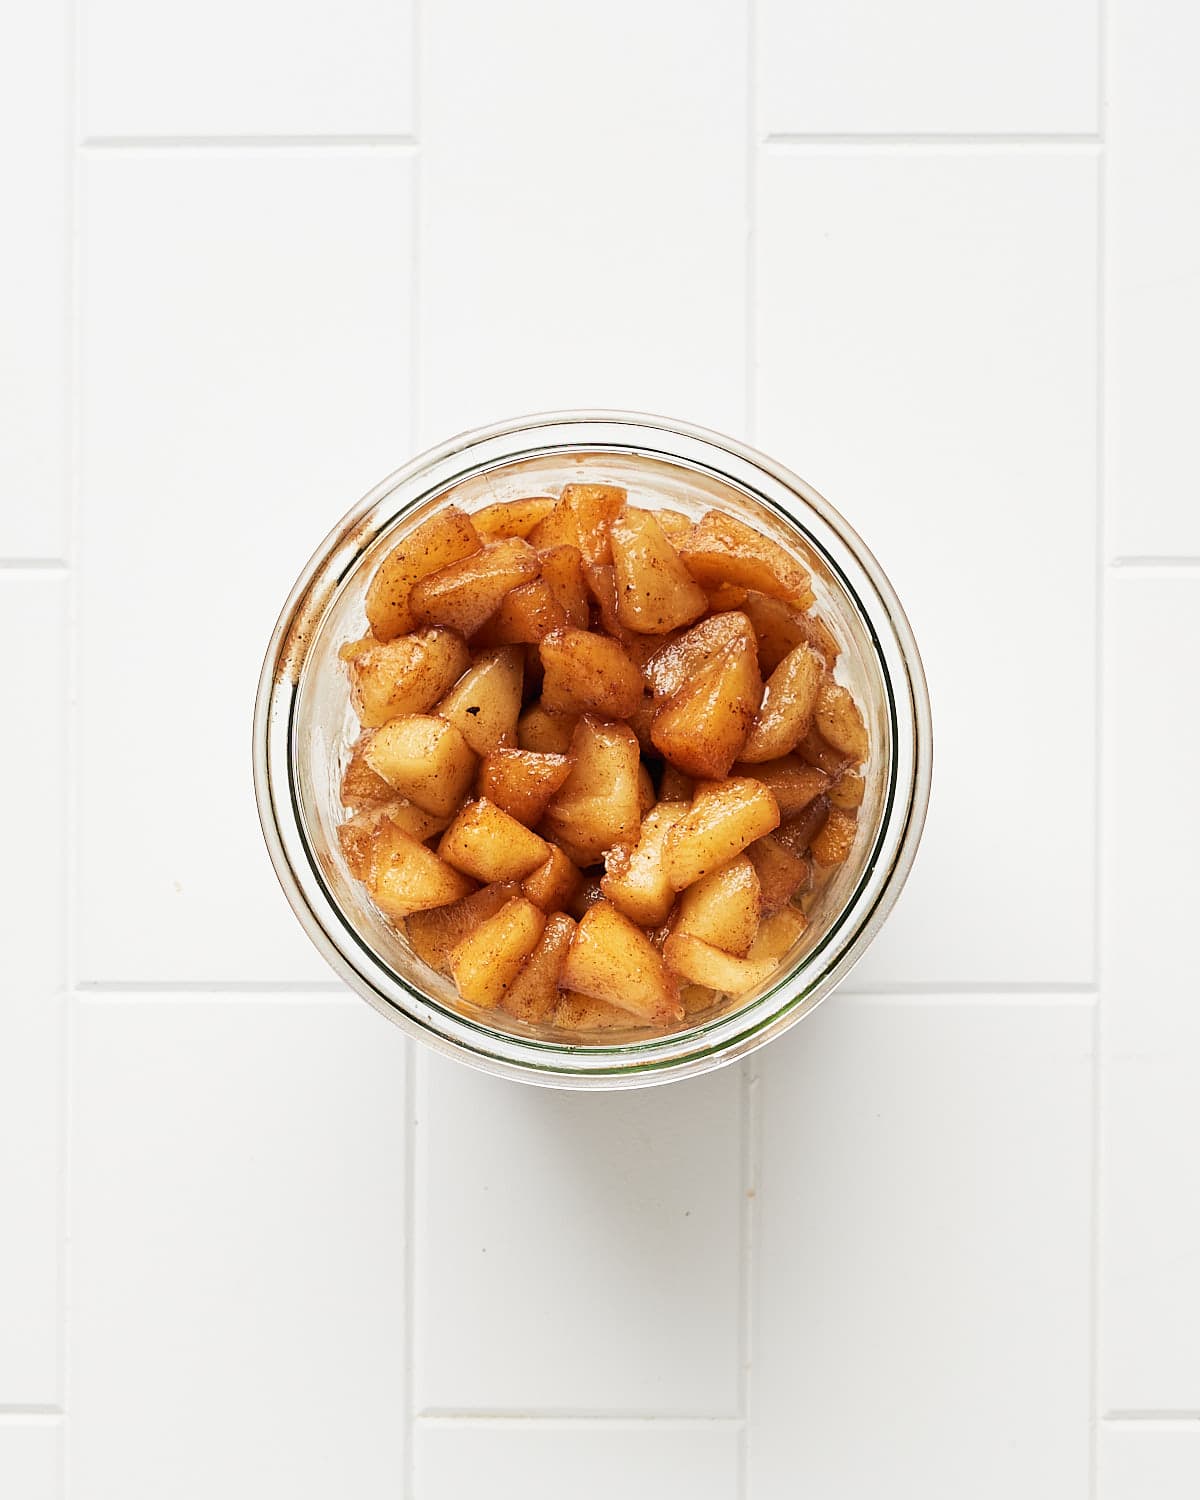 Overhead view of apple compote in a glass jar on a white surface.